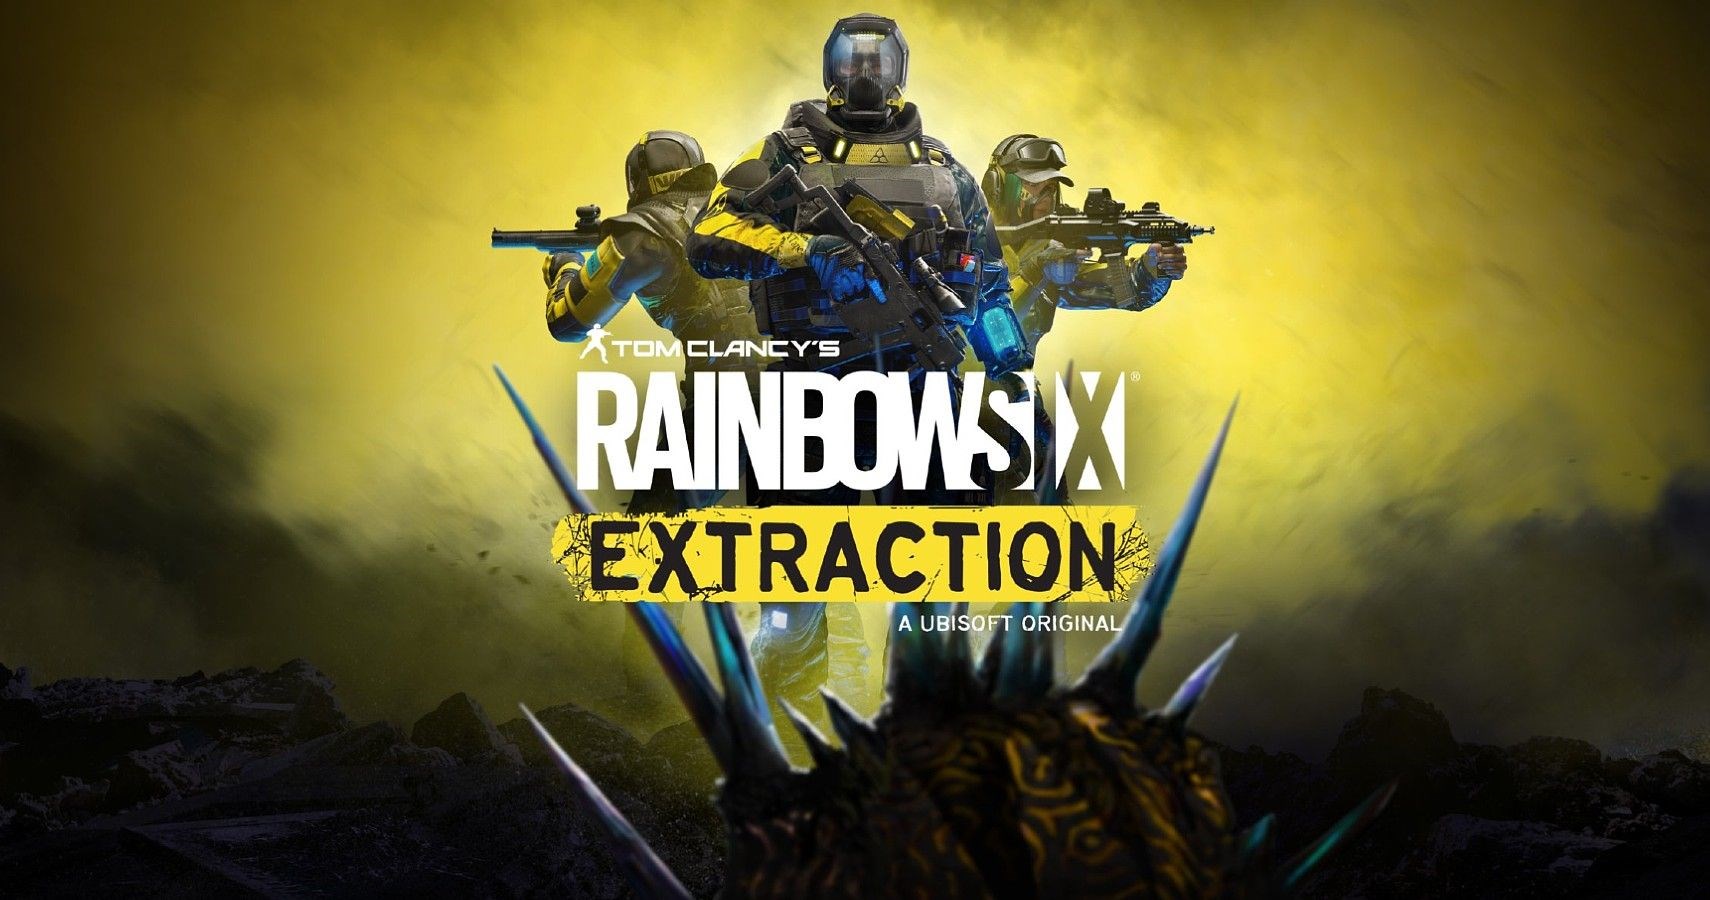 New gameplay video from rainbow six extraction has arrived